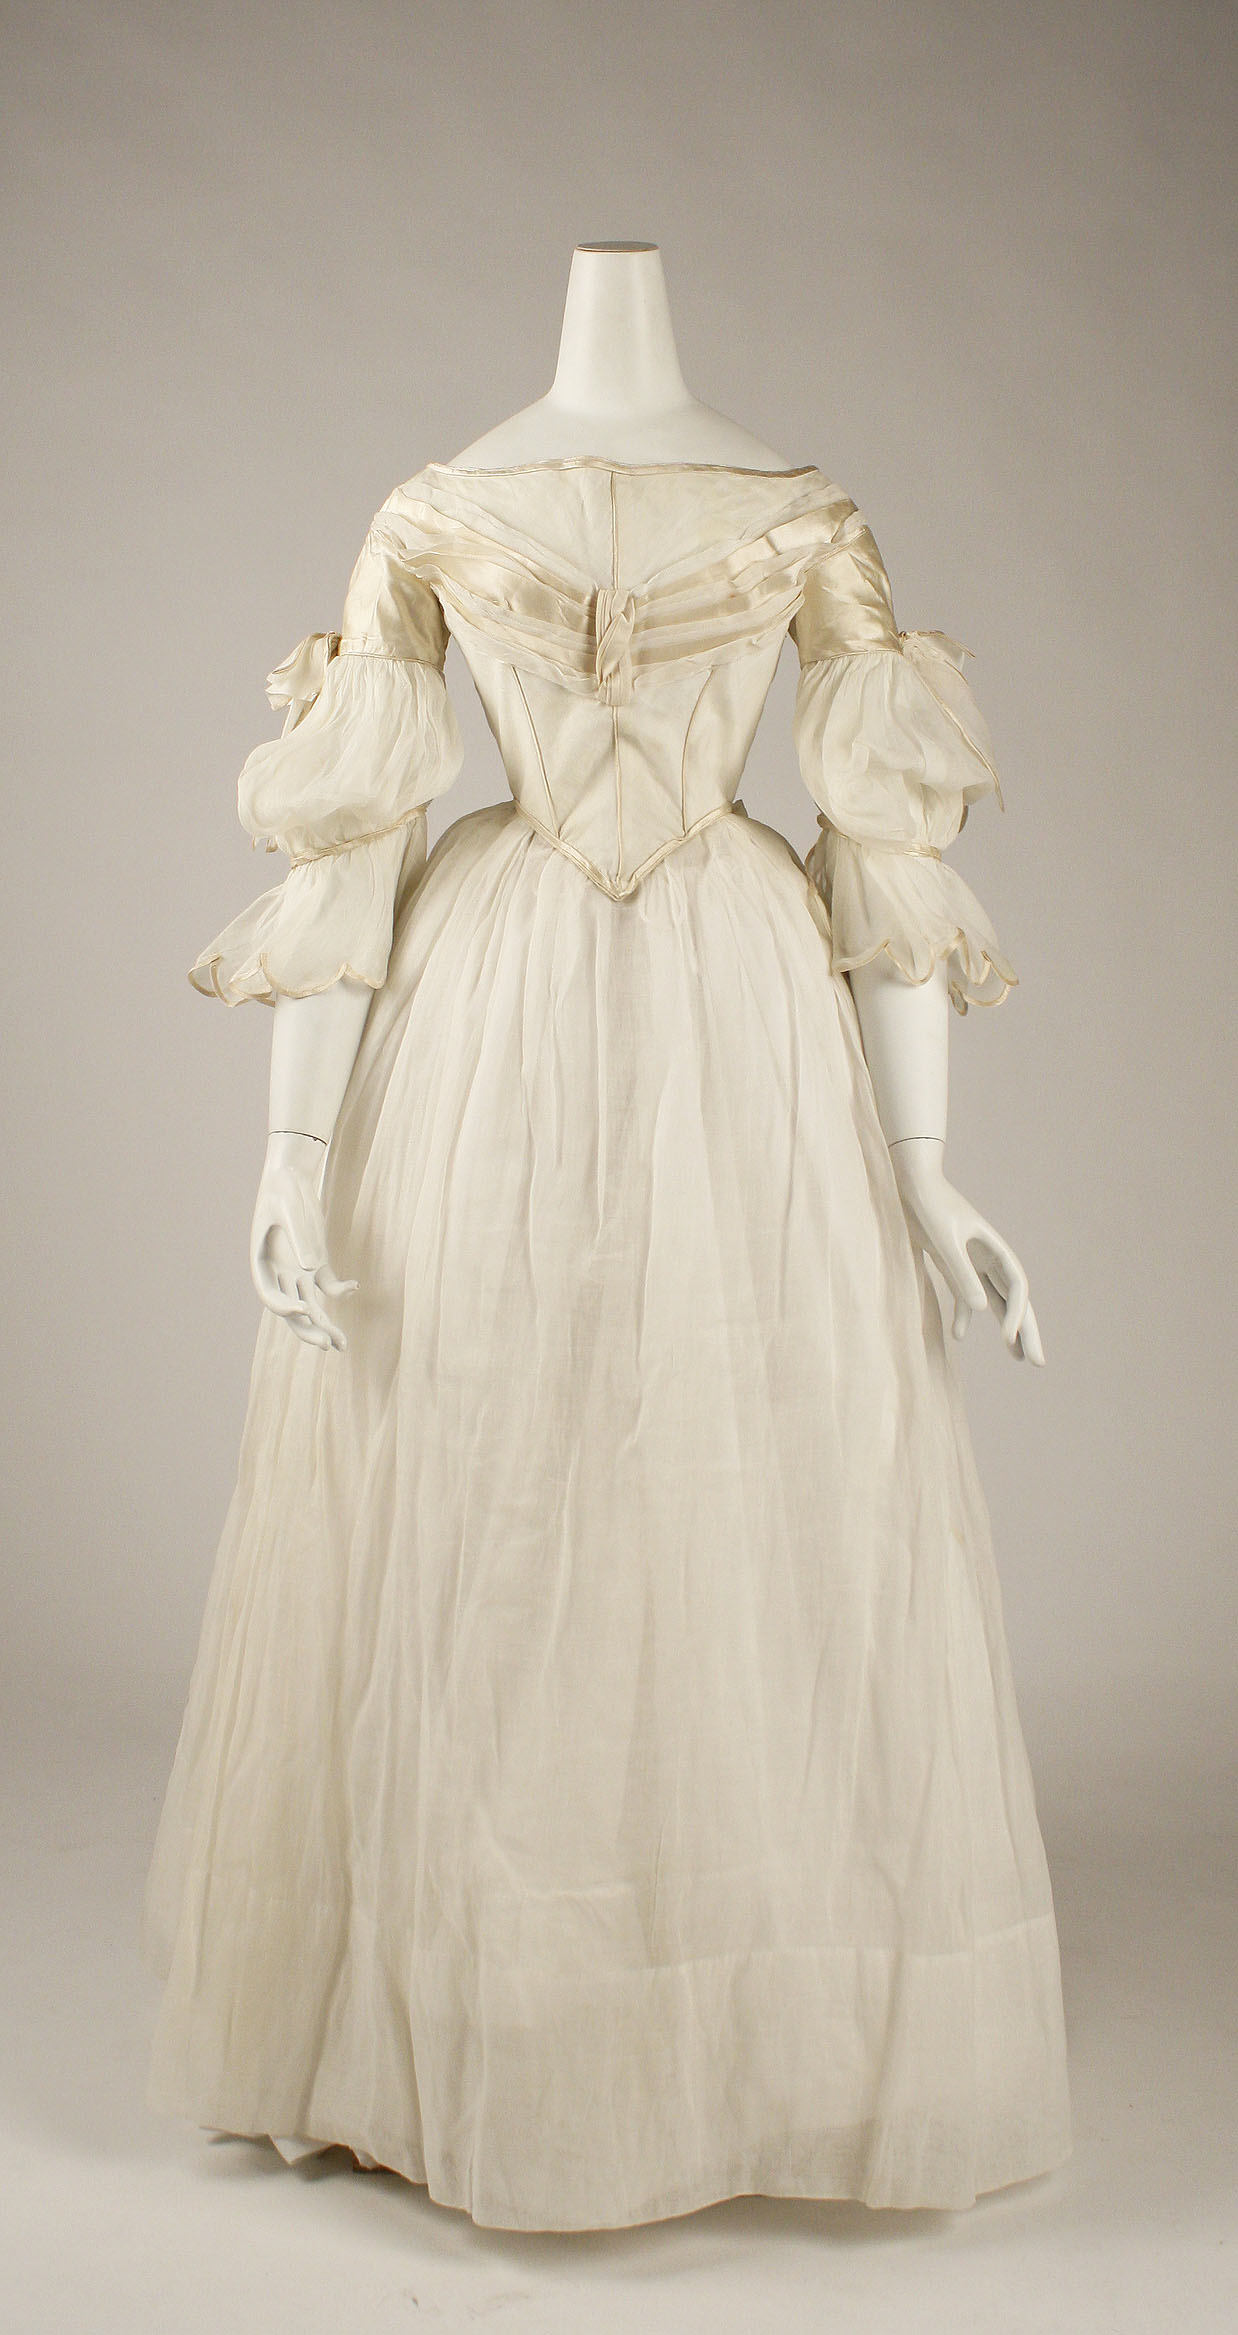 Rate the Dress: All white in the 1840s ...